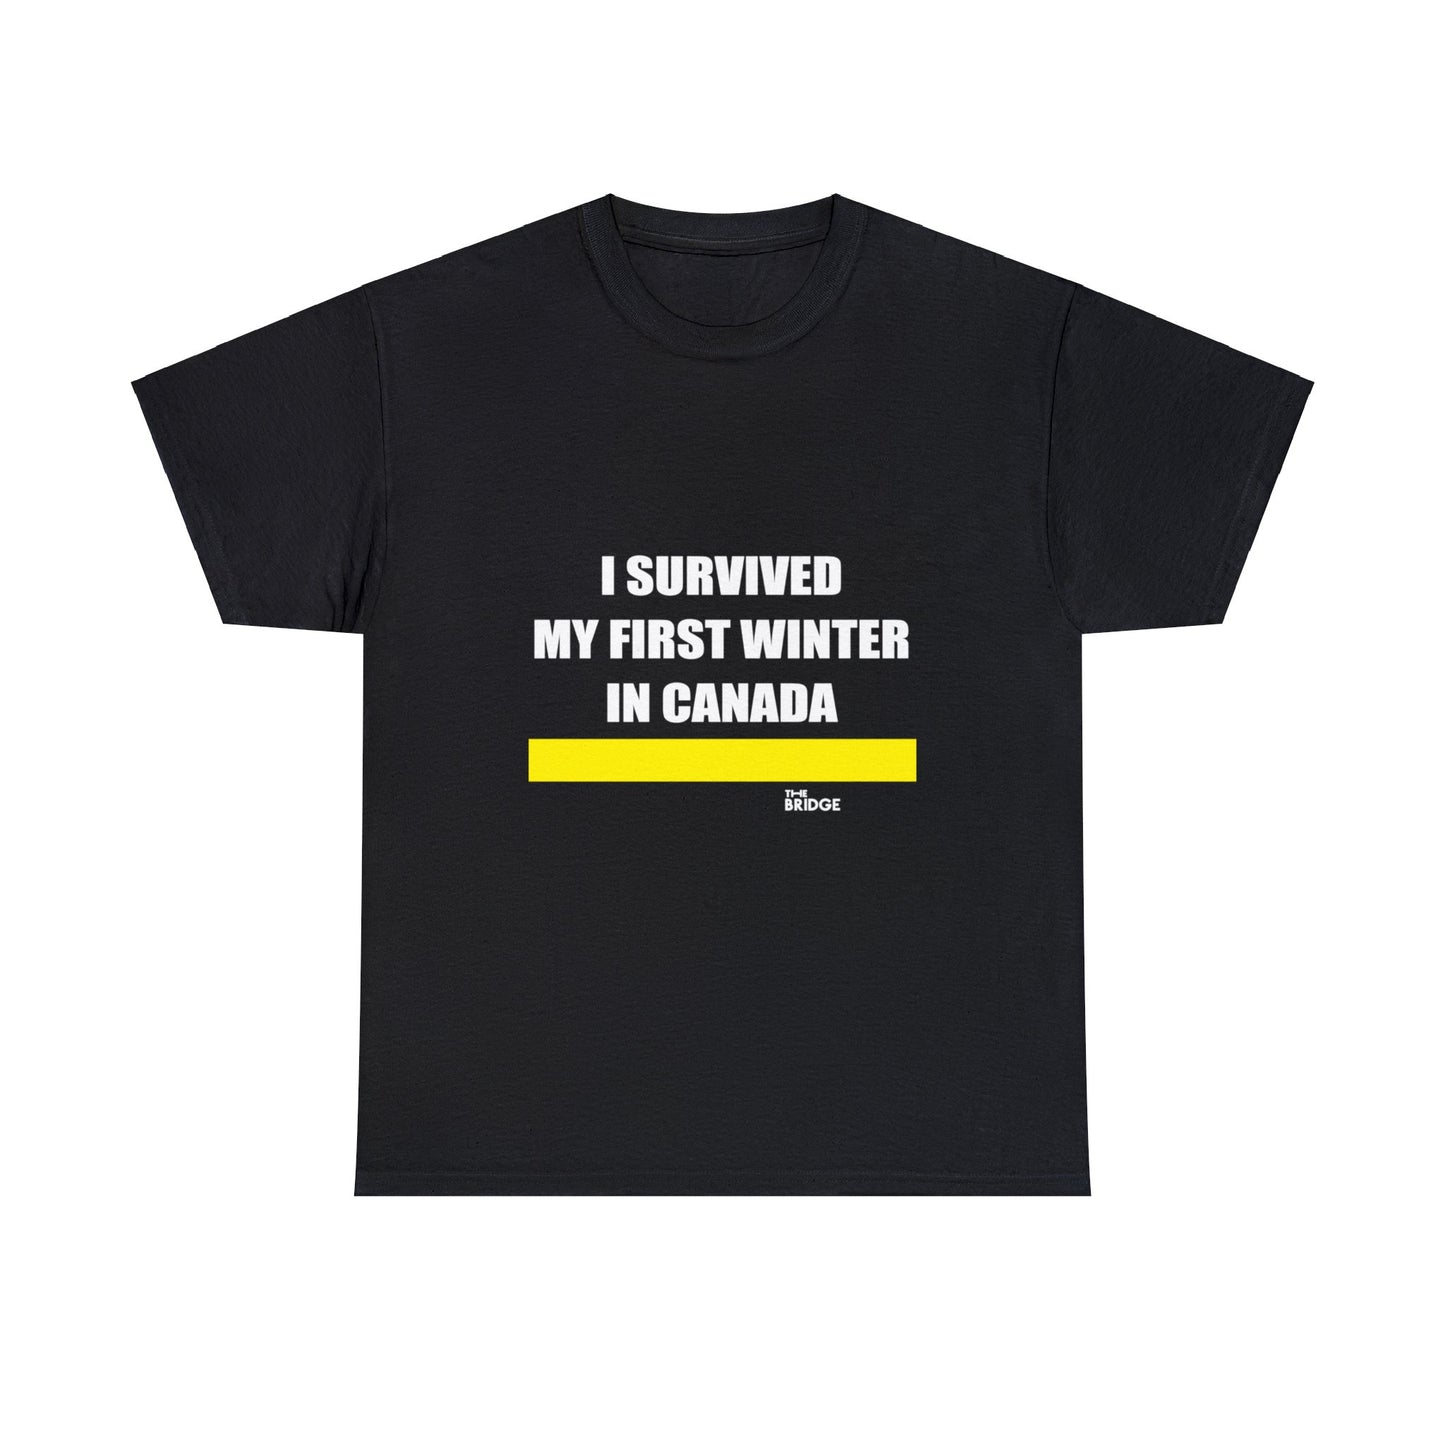 I SURVIVED MY FIRST WINTER - BLACK T-SHIRT